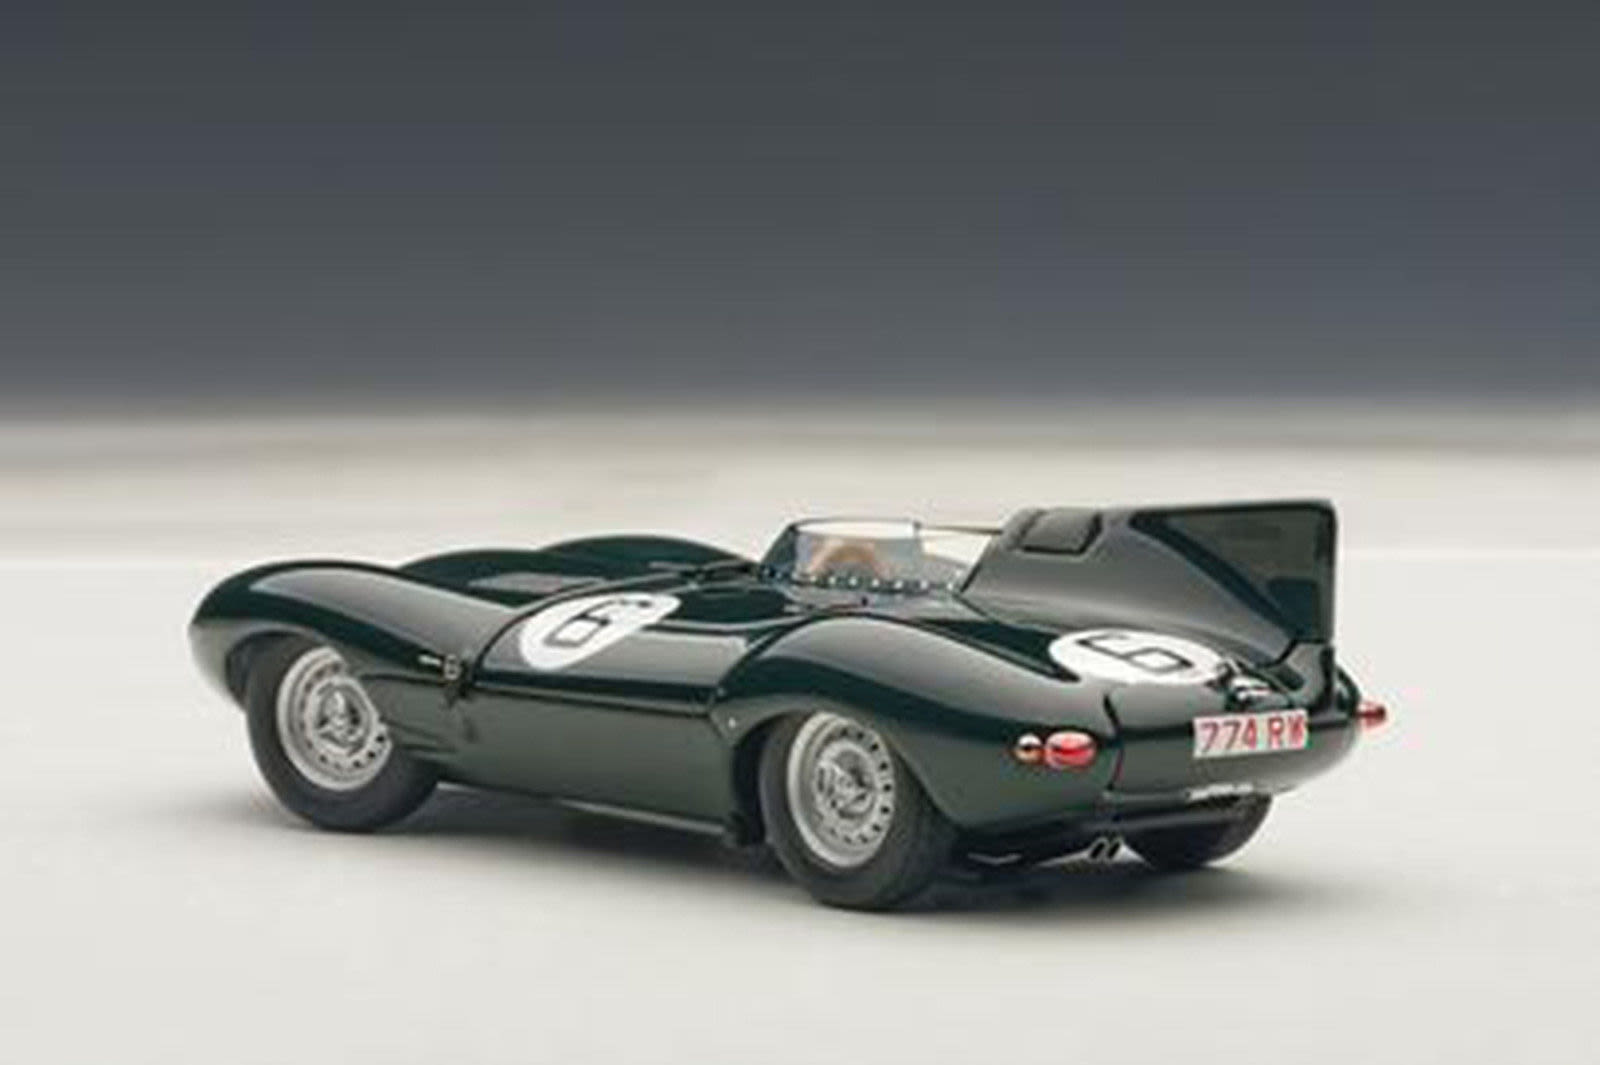 Illustration for article titled For $139, Will This AutoArt 1955 Jaguar D Type Race To Victory?